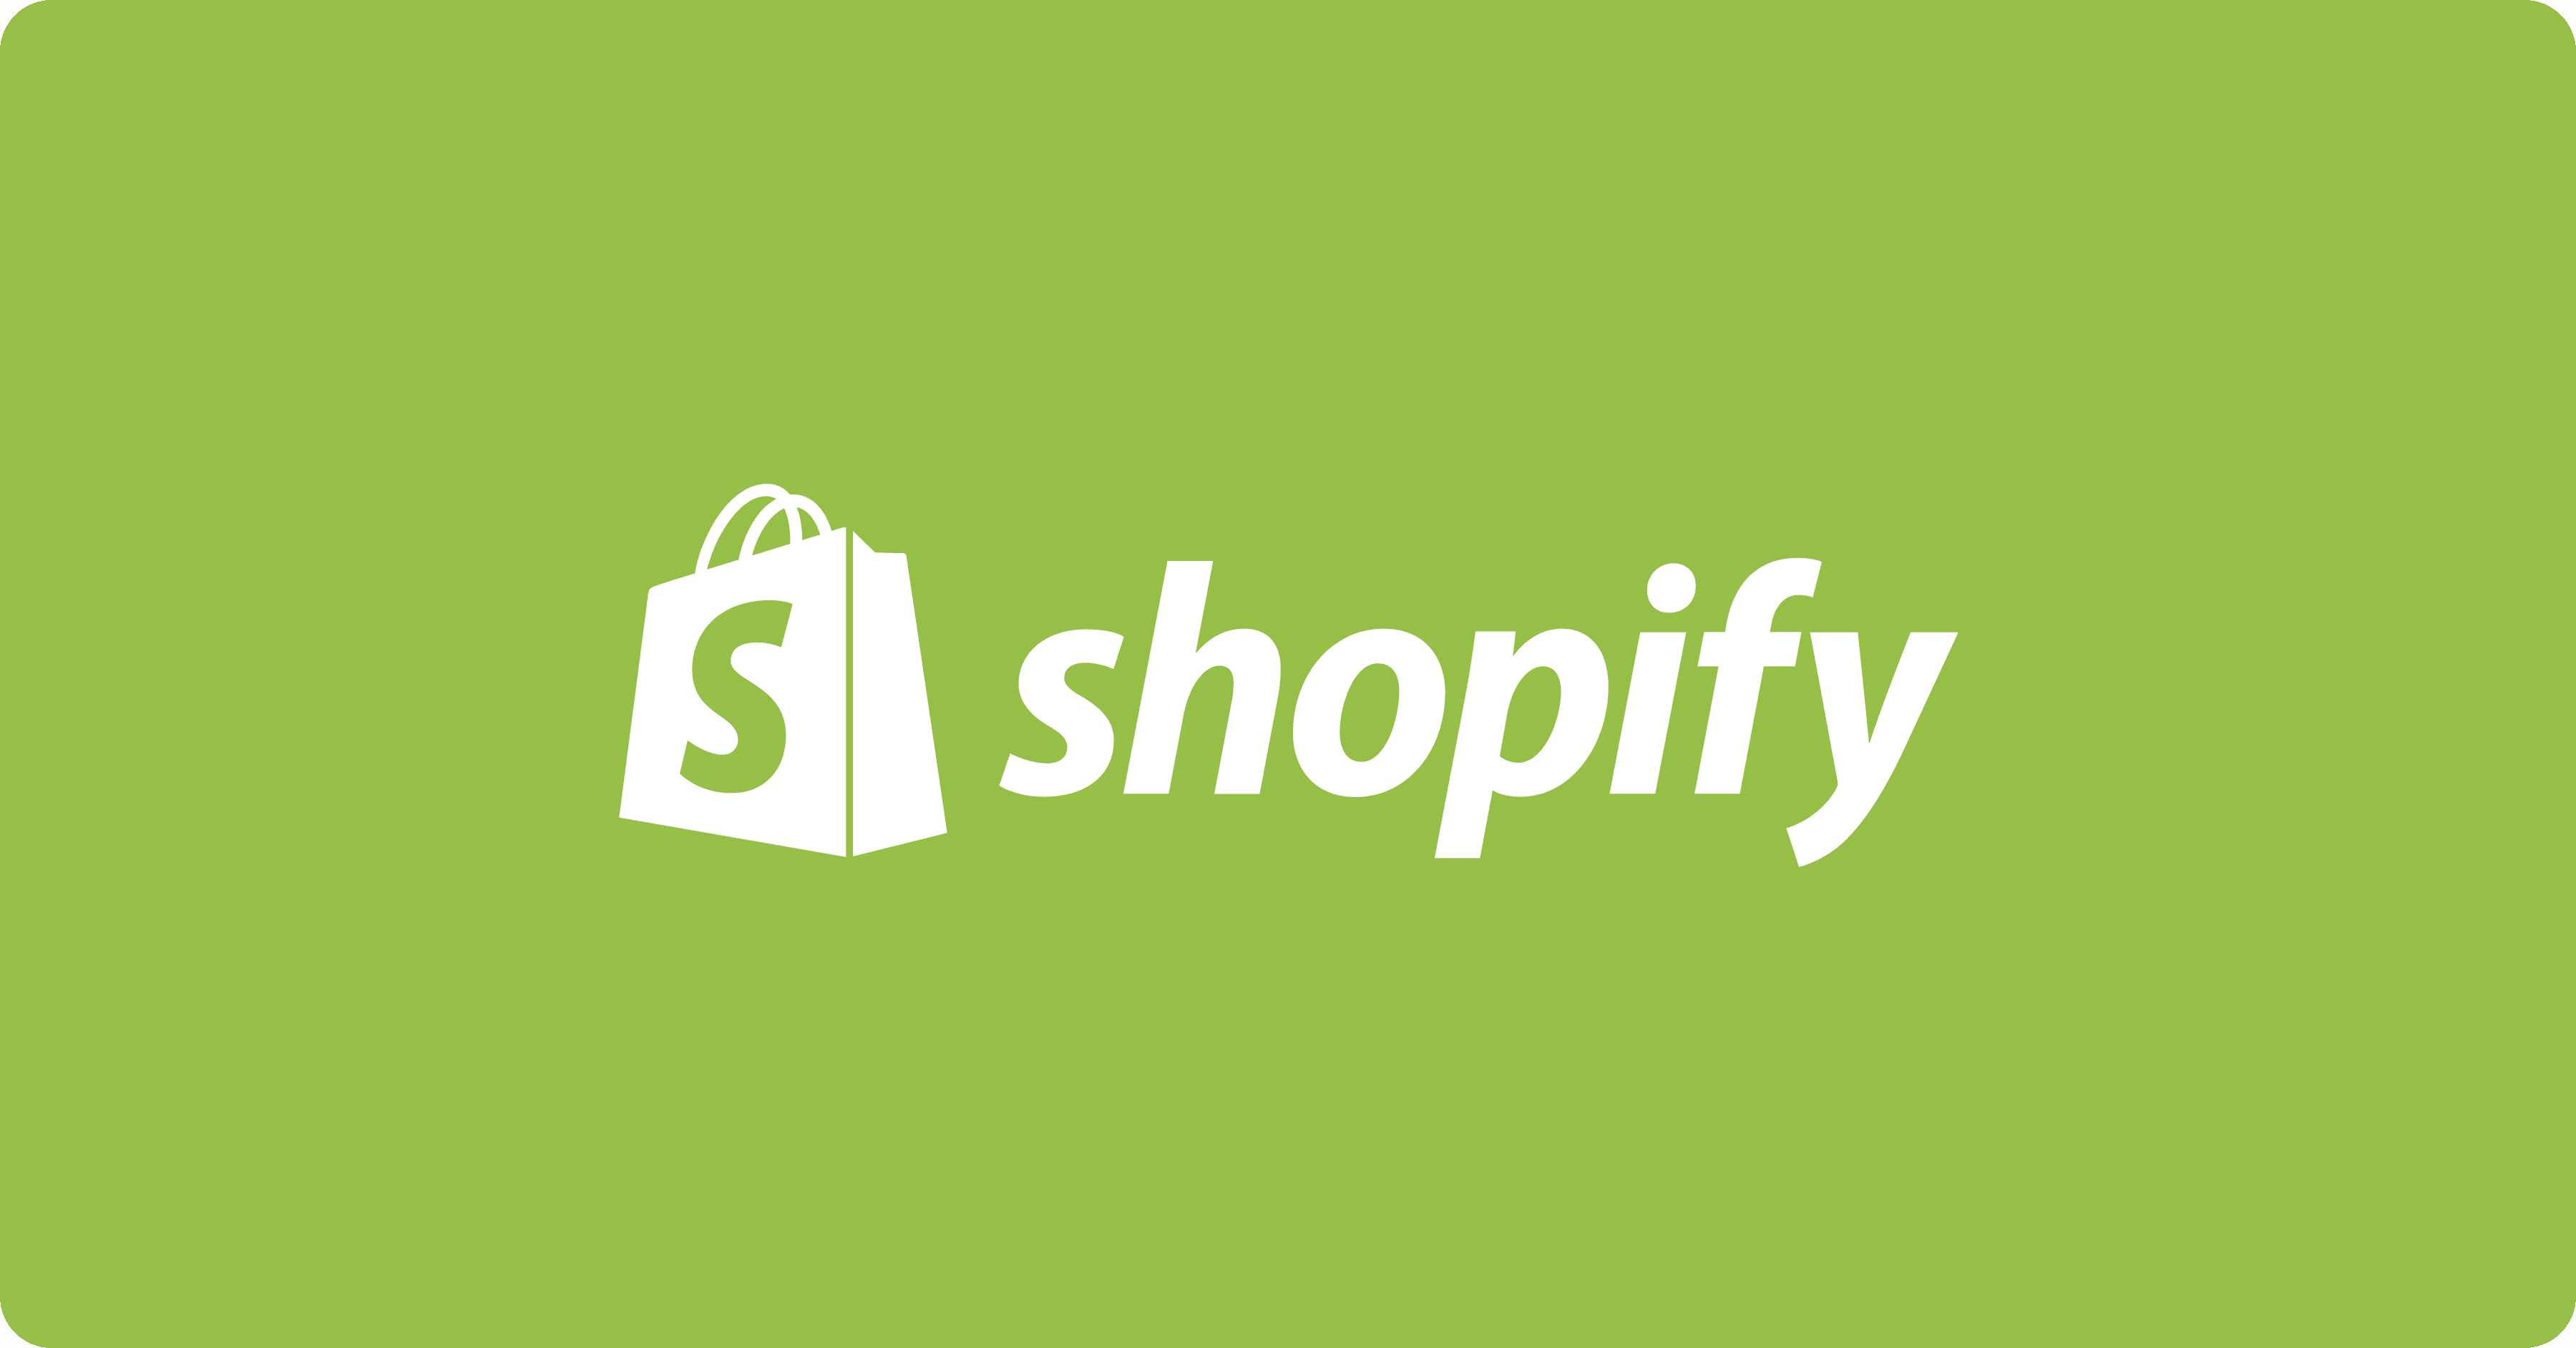 Shopify users: enable real-time personalization on your site, powered by Miso.ai, in a single afternoon